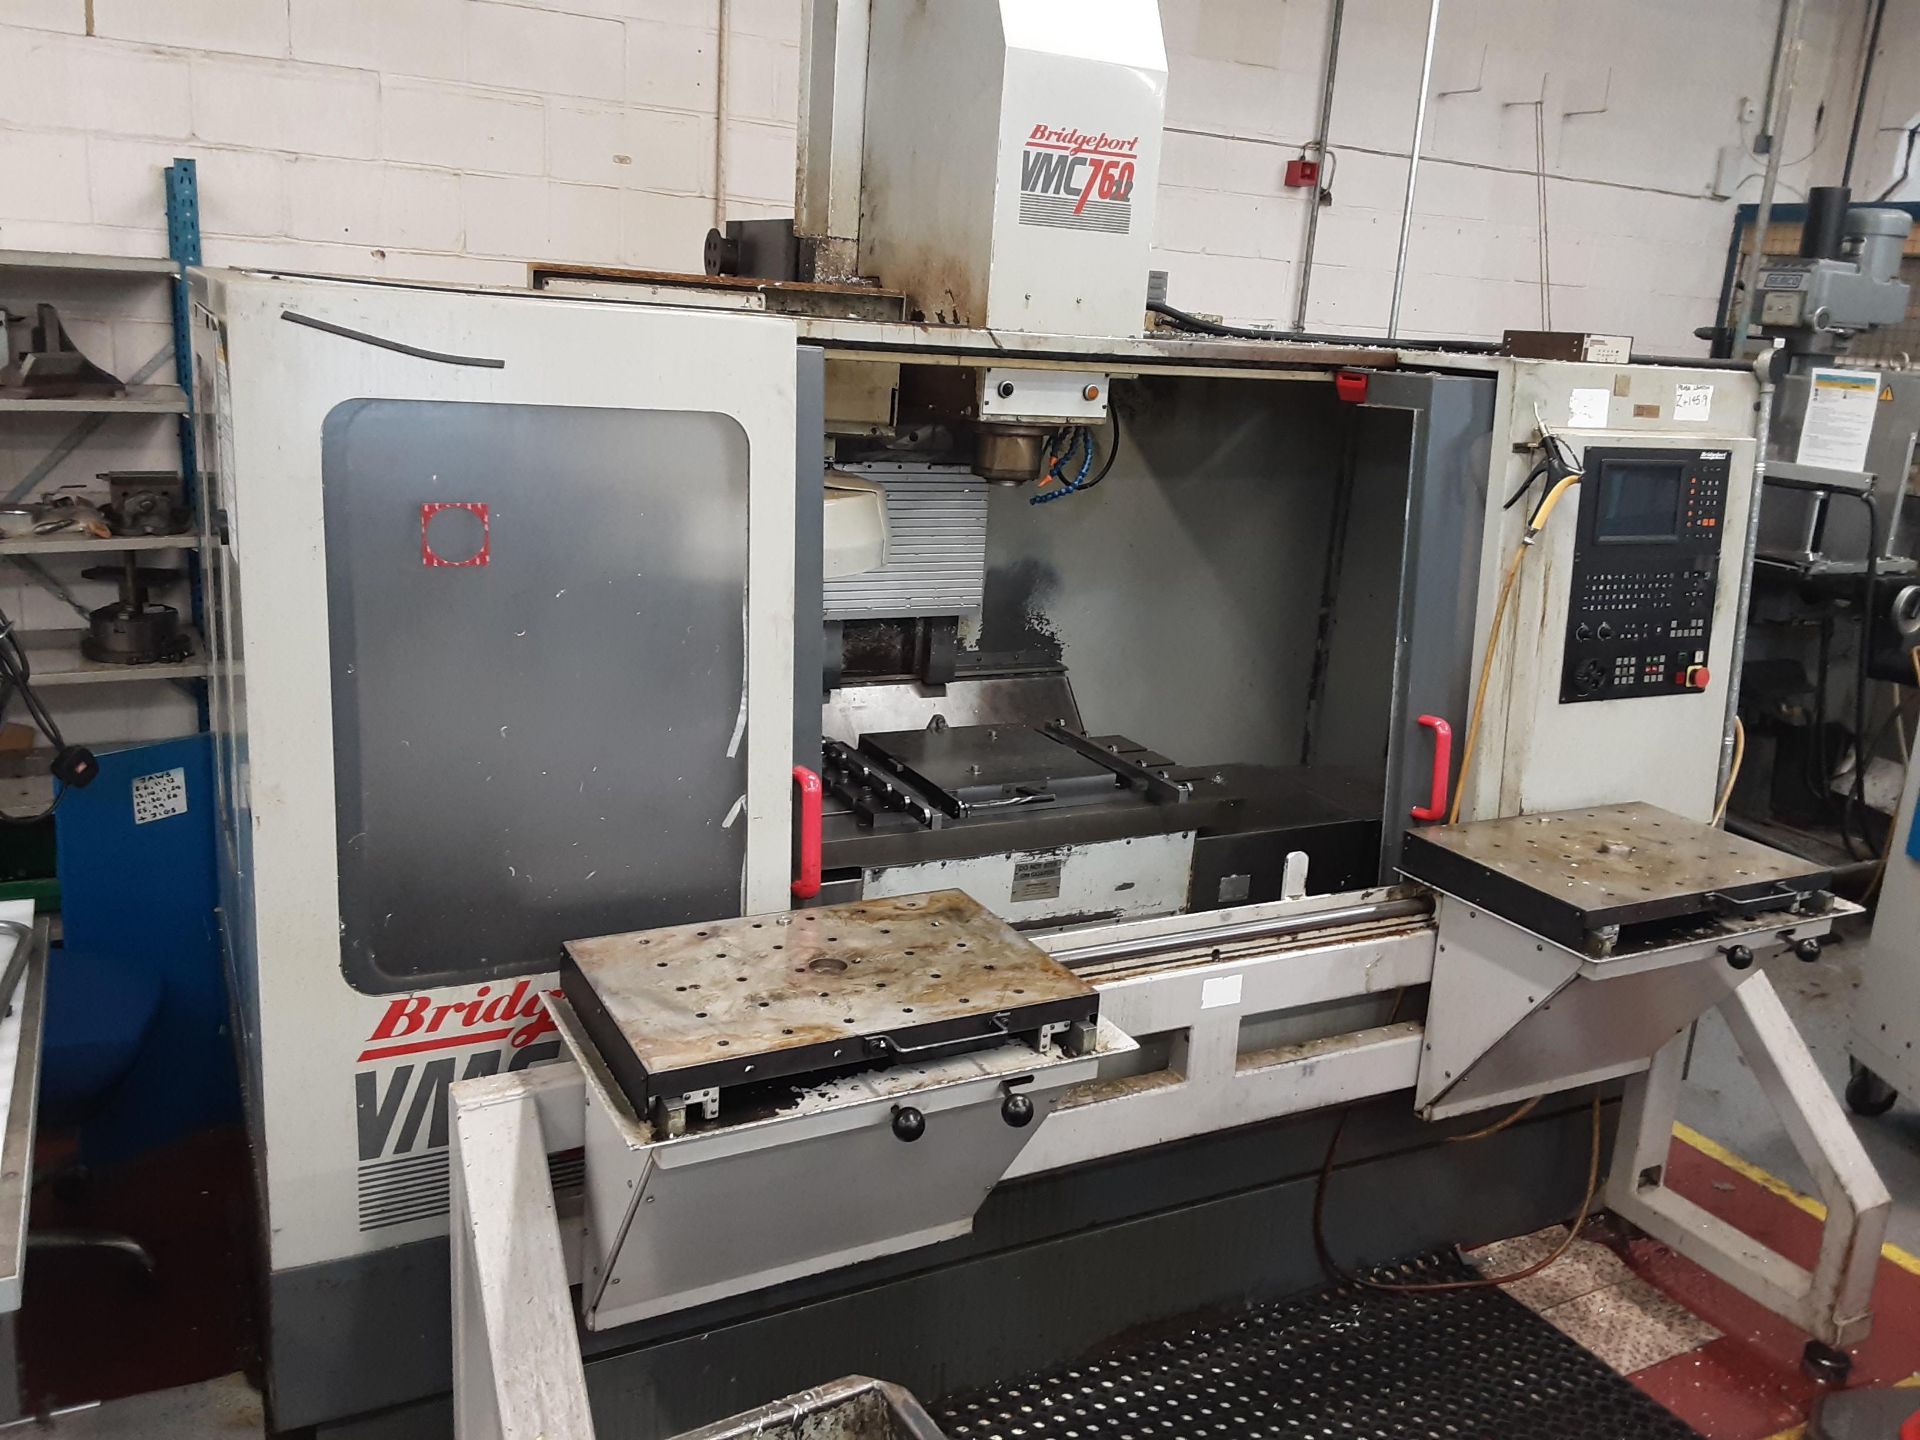 Bridgeport VMC 760 CNC vertical machining centre with work bench and swarf skip - Serial No: 20363 - Image 3 of 27